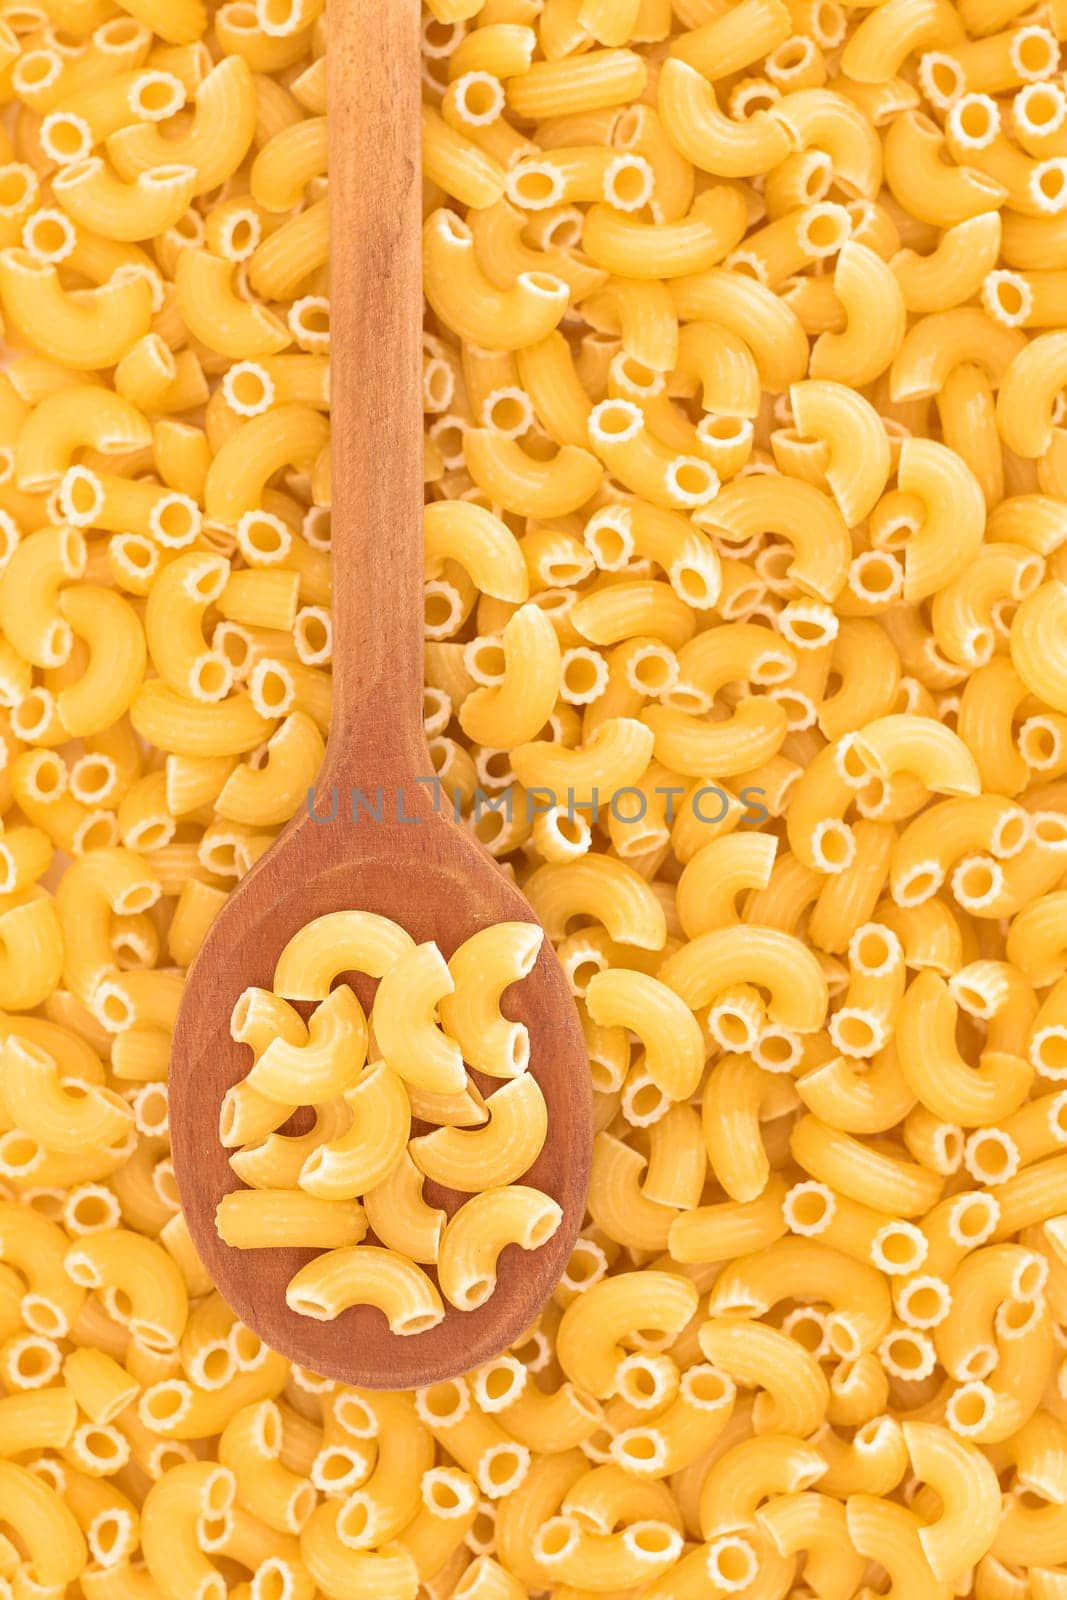 Uncooked Chifferi Rigati Pasta Background with Wooden Spoon by InfinitumProdux